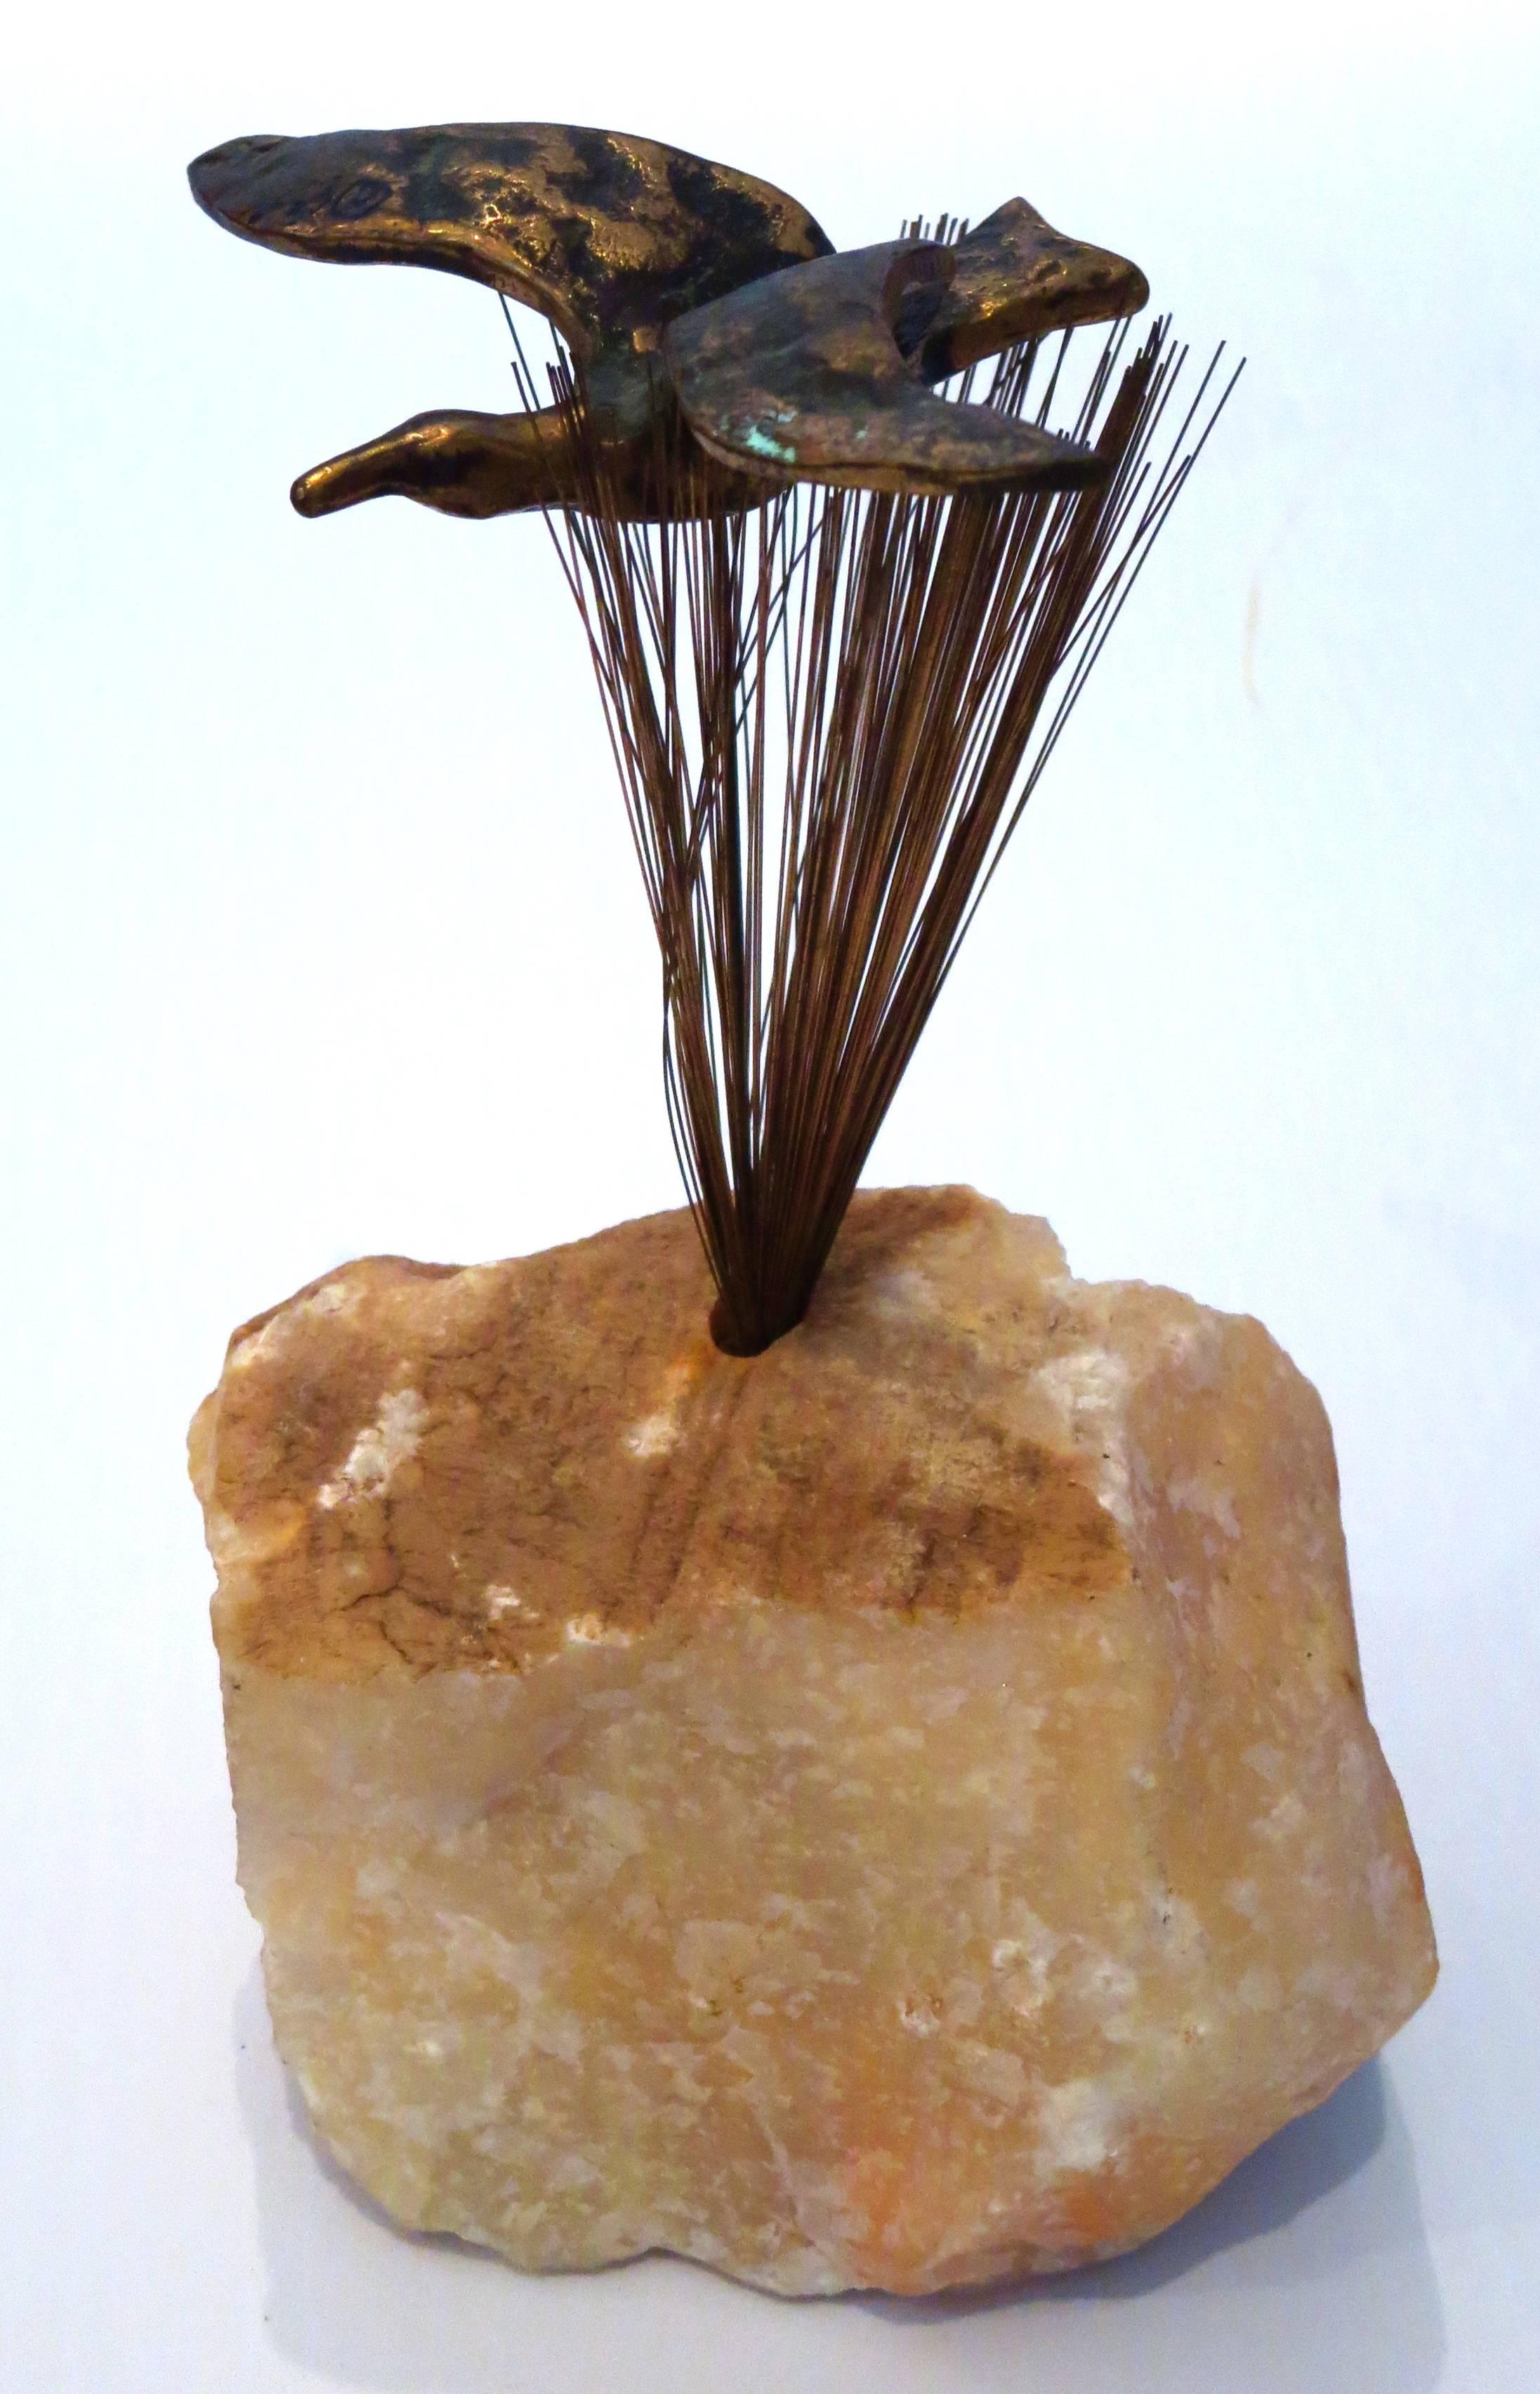 Rare studio Jere signed bronze table sculpture, by curtis Jere , sirca 1970s sitting on a raw marble stone base , well made and beautifull to look at it.